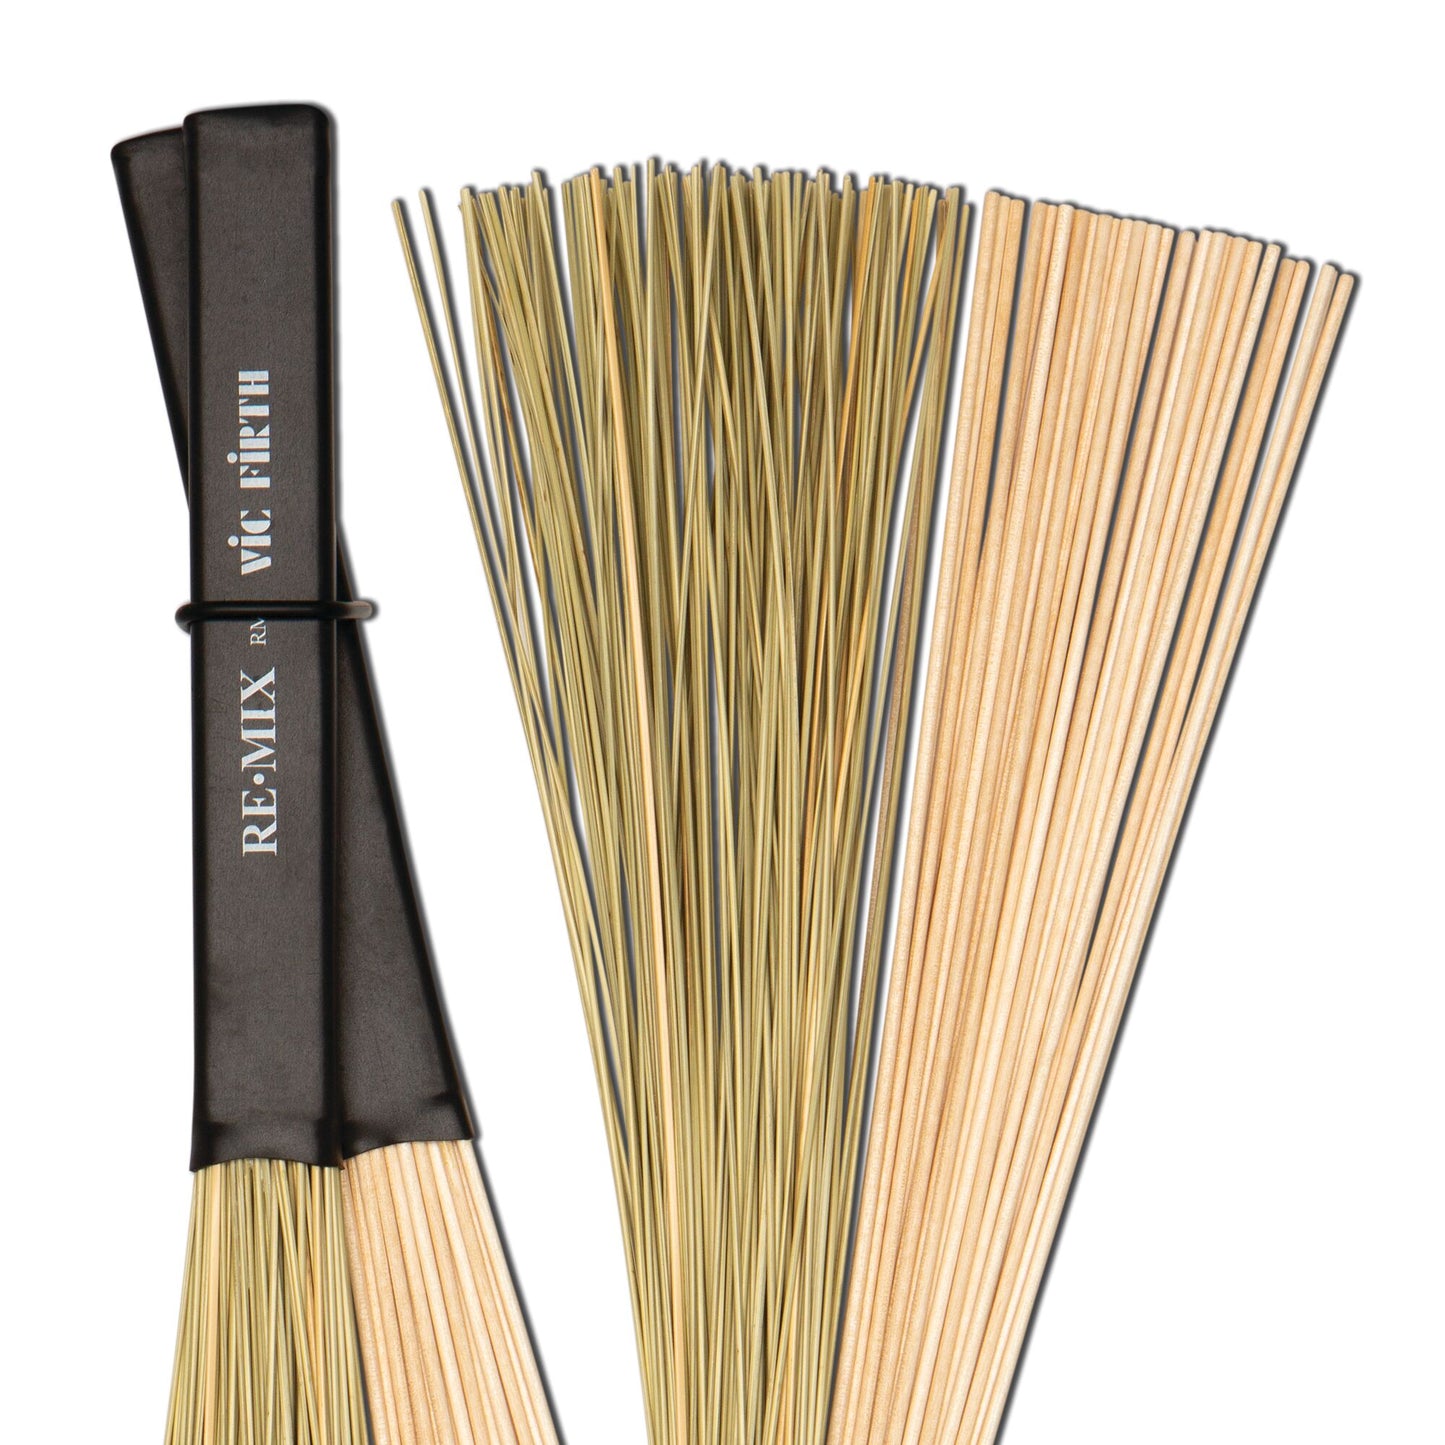 RE·MIX 2-Pair Combo Pack - Grass & Birch Brushes